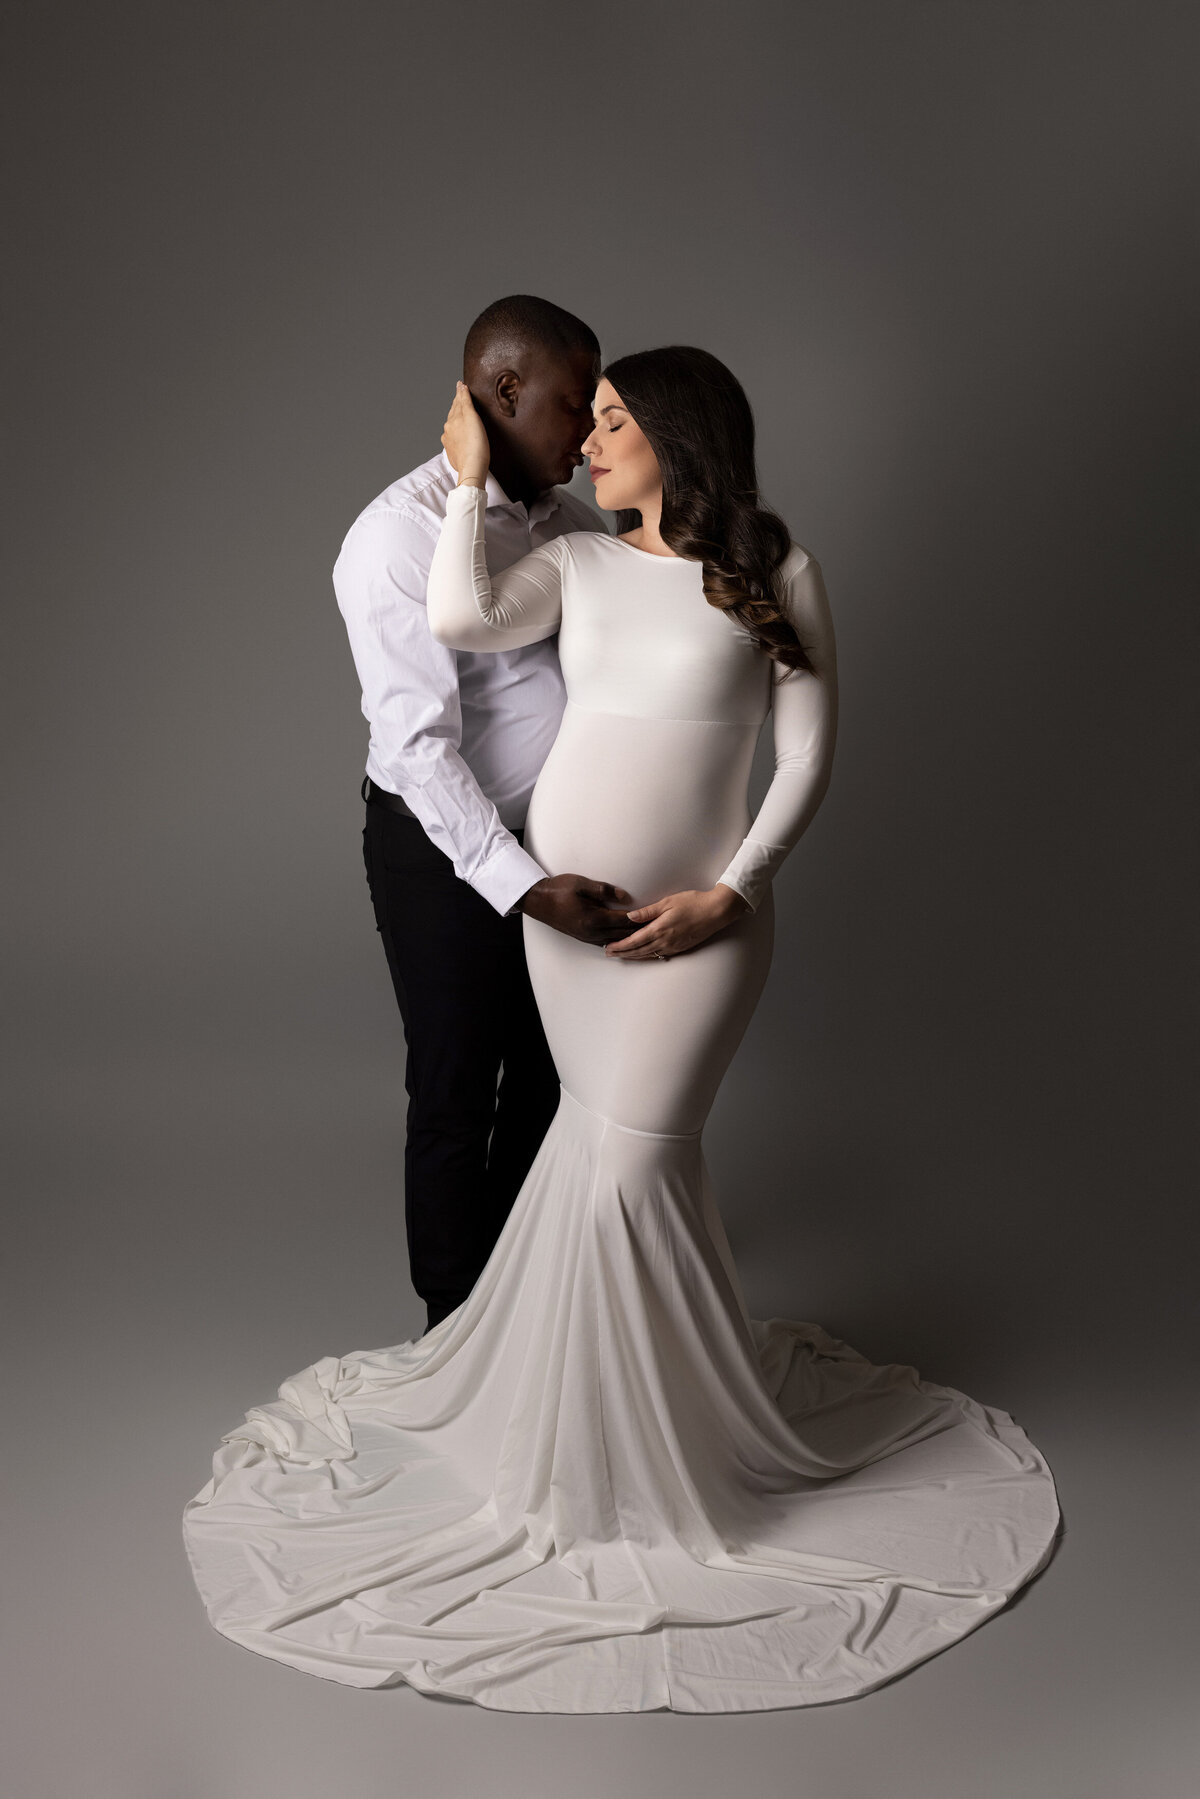 Expectant mom and Dad in London, Ontario photography studio. Mom is square to the camera, Dad is behind her putting his forehead against hers. Both are gently touching the baby bump.